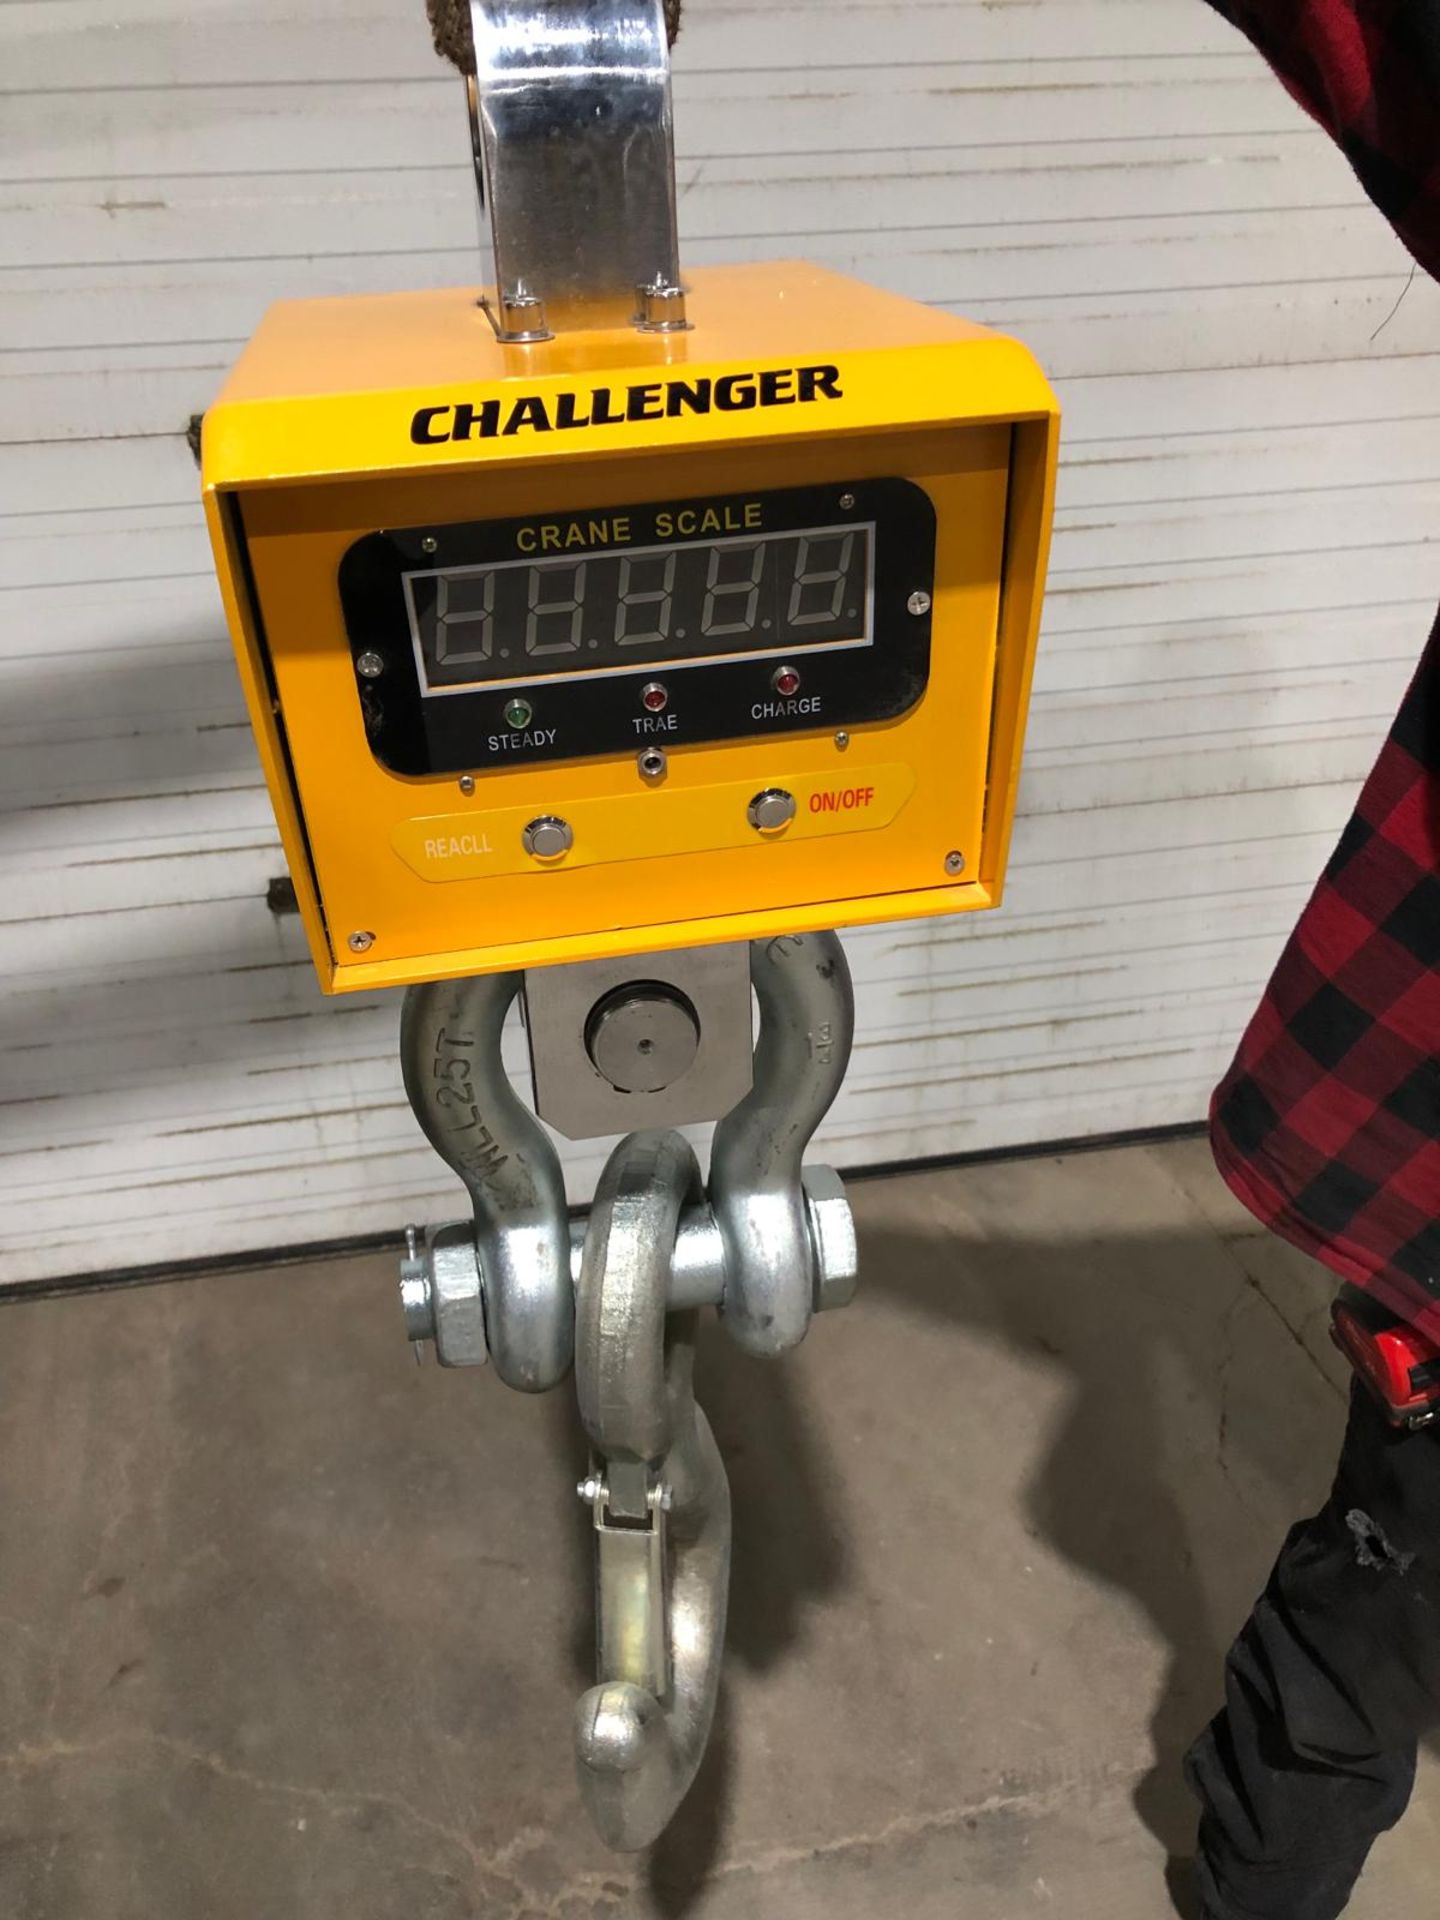 Challenger Hanging MINT Digital Crane Scale 40,000lbs 20 ton Capacity - complete with remote control